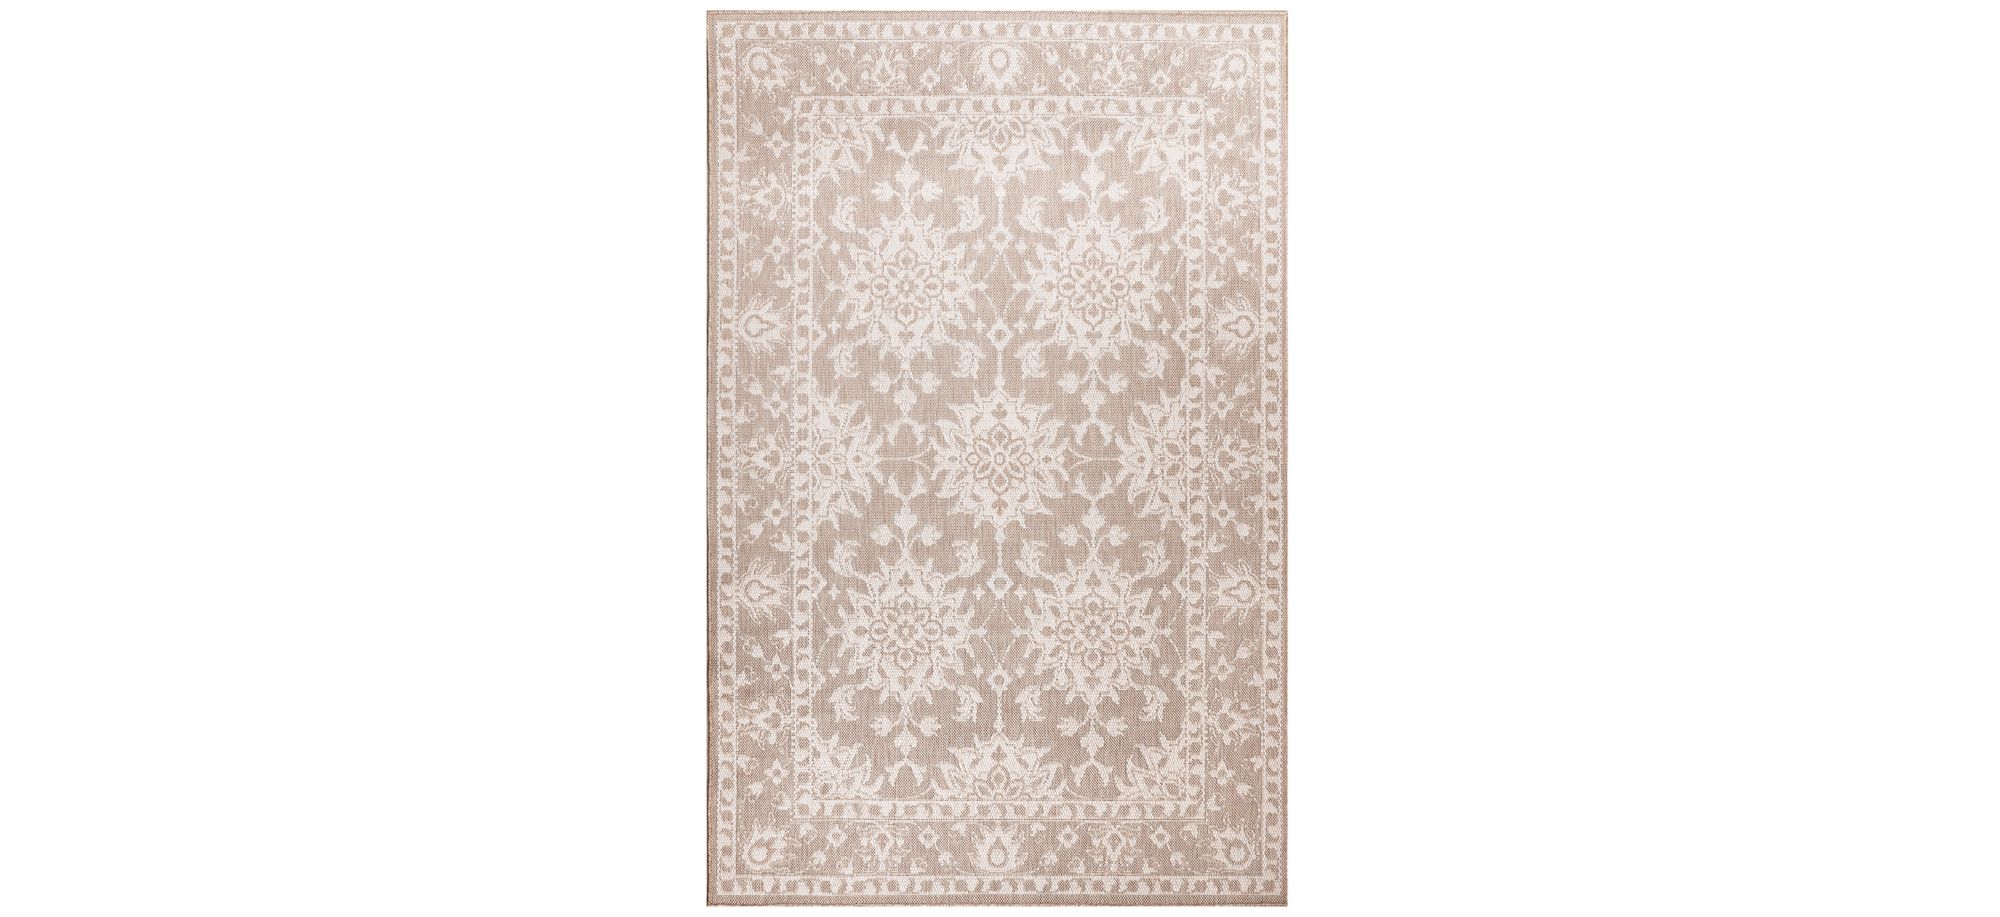 Liora Manne Malibu Kashan Indoor/Outdoor Area Rug in Neutral by Trans-Ocean Import Co Inc